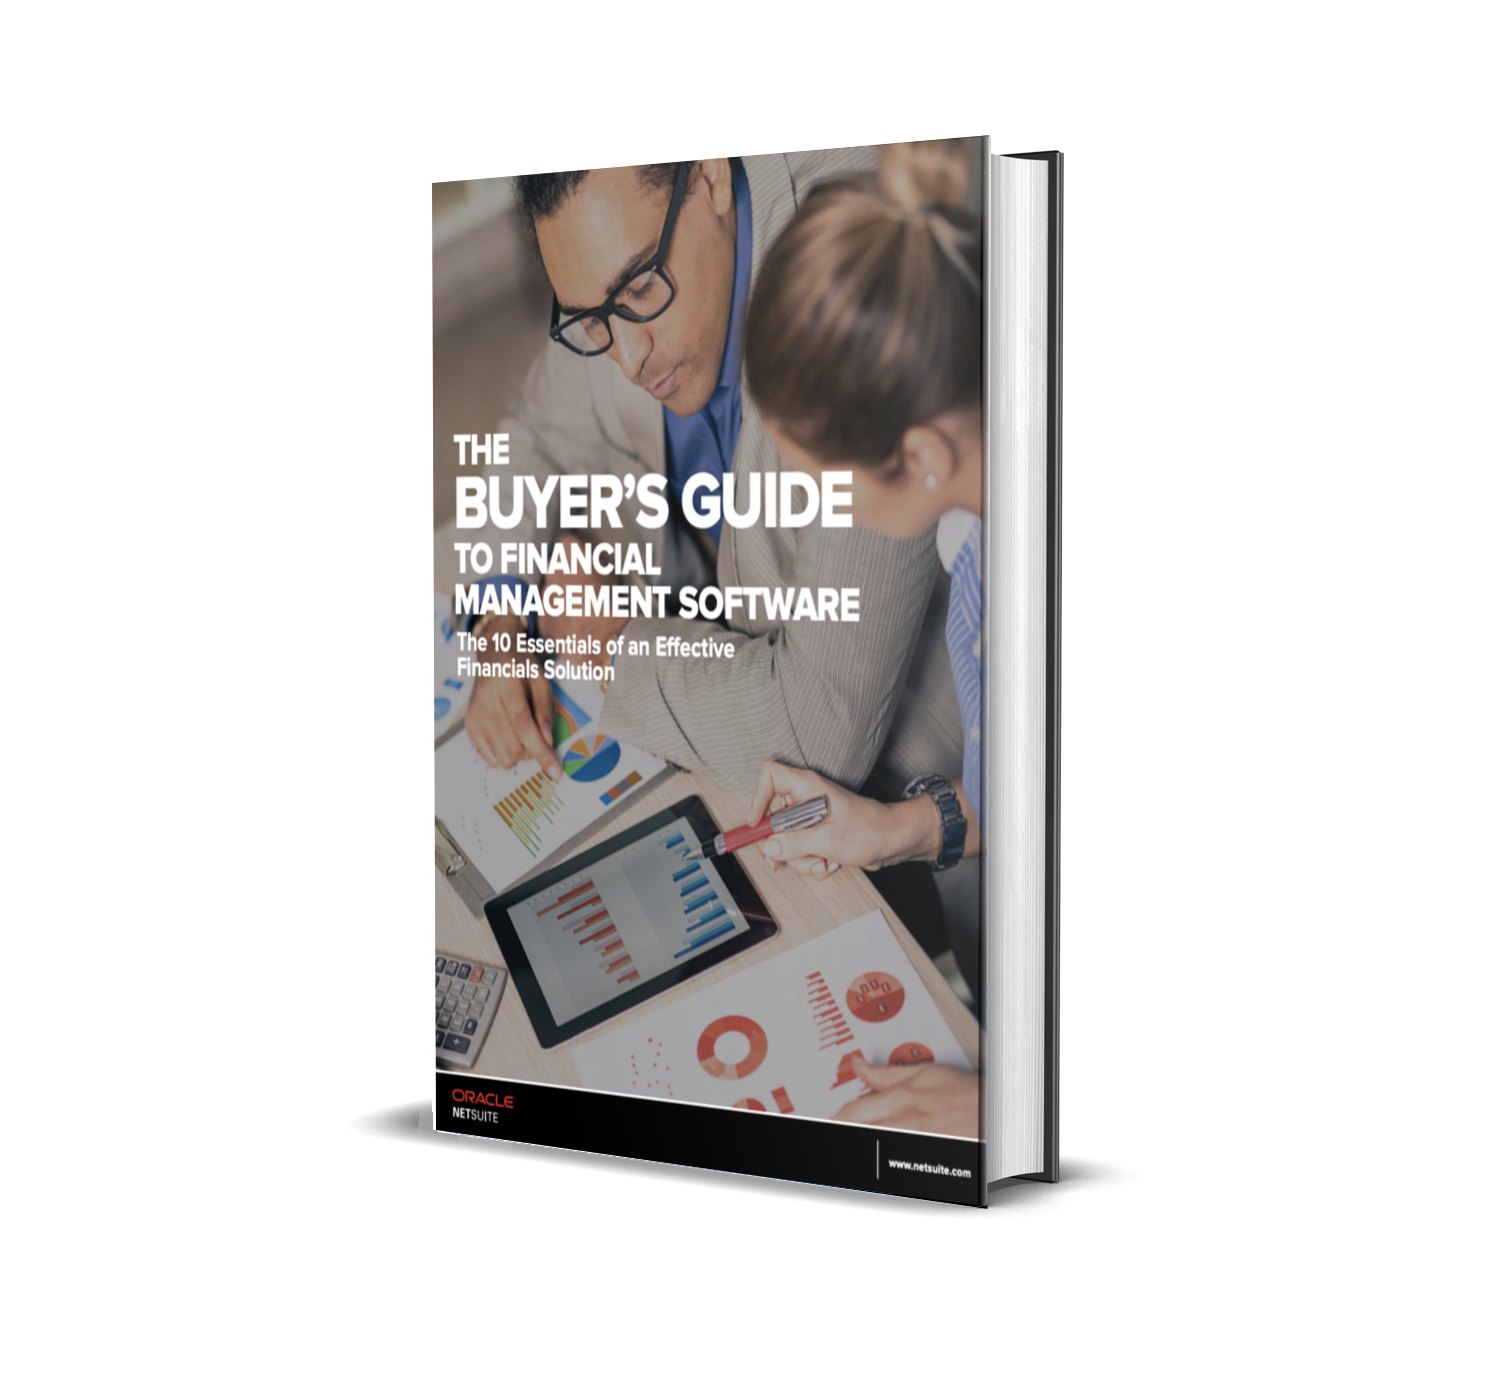 The Buyer's Guide to Financial Management Software